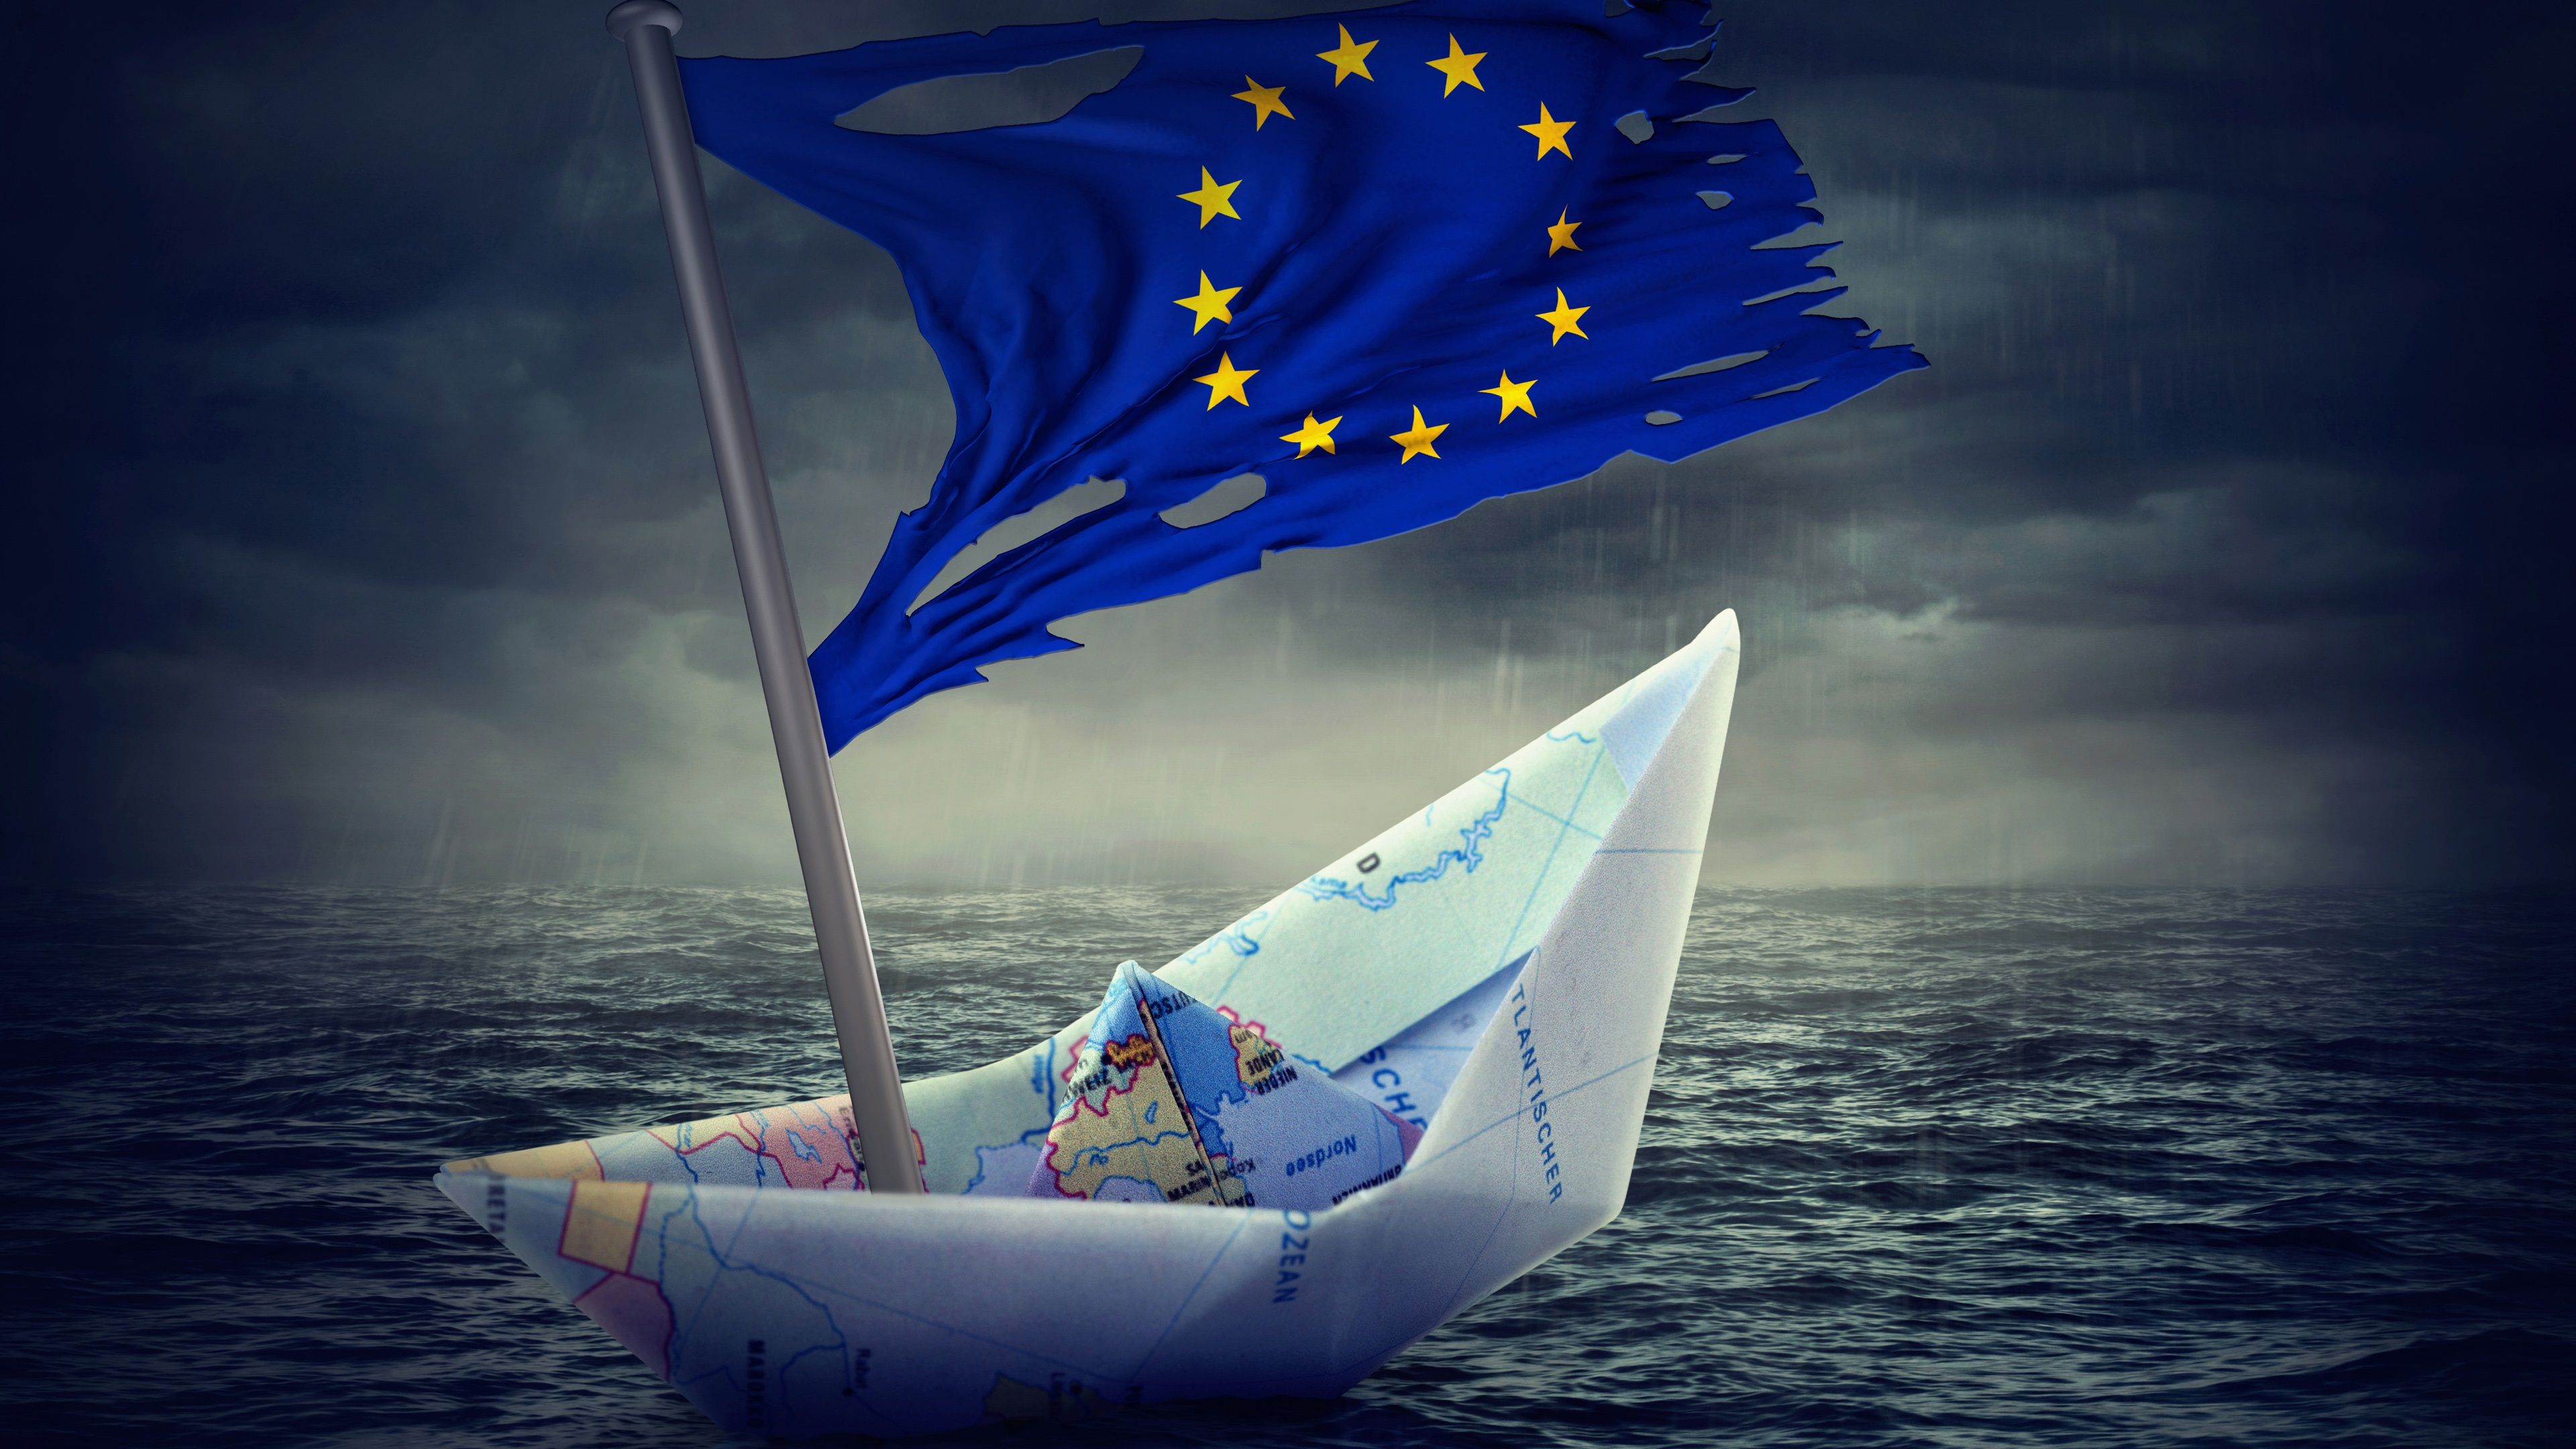 Wallpaper Paper boat, Flag of Europe, creative picture 3840x2160 UHD 4K Picture, Image